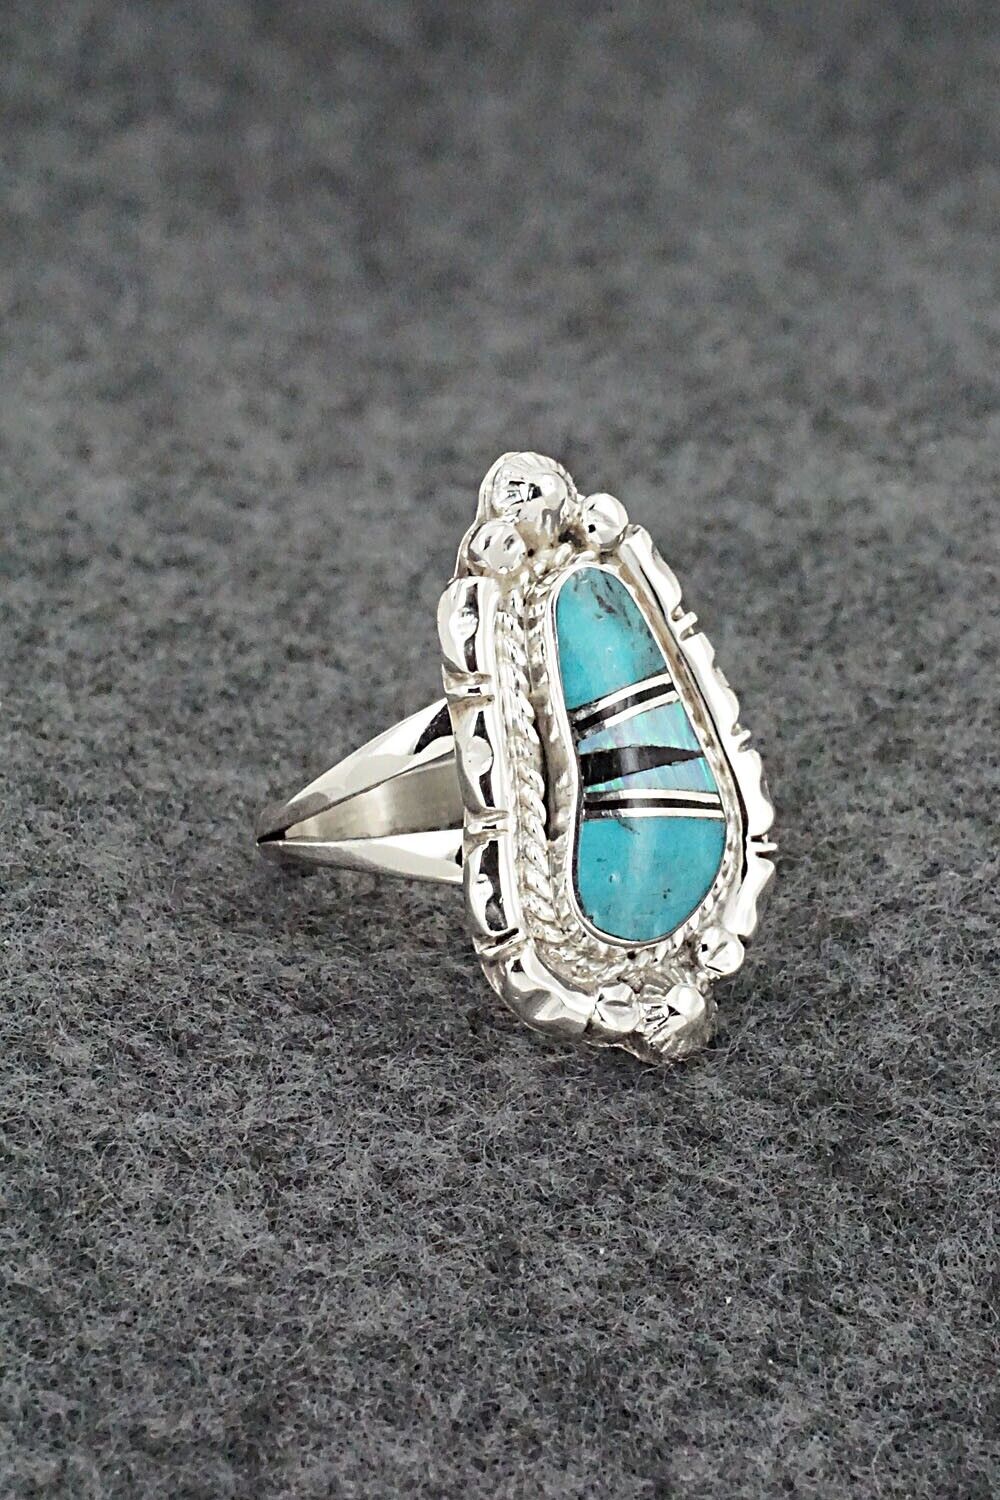 Turquoise, Onyx, Opalite & Sterling Silver Ring - James Manygoats - Size 6.25